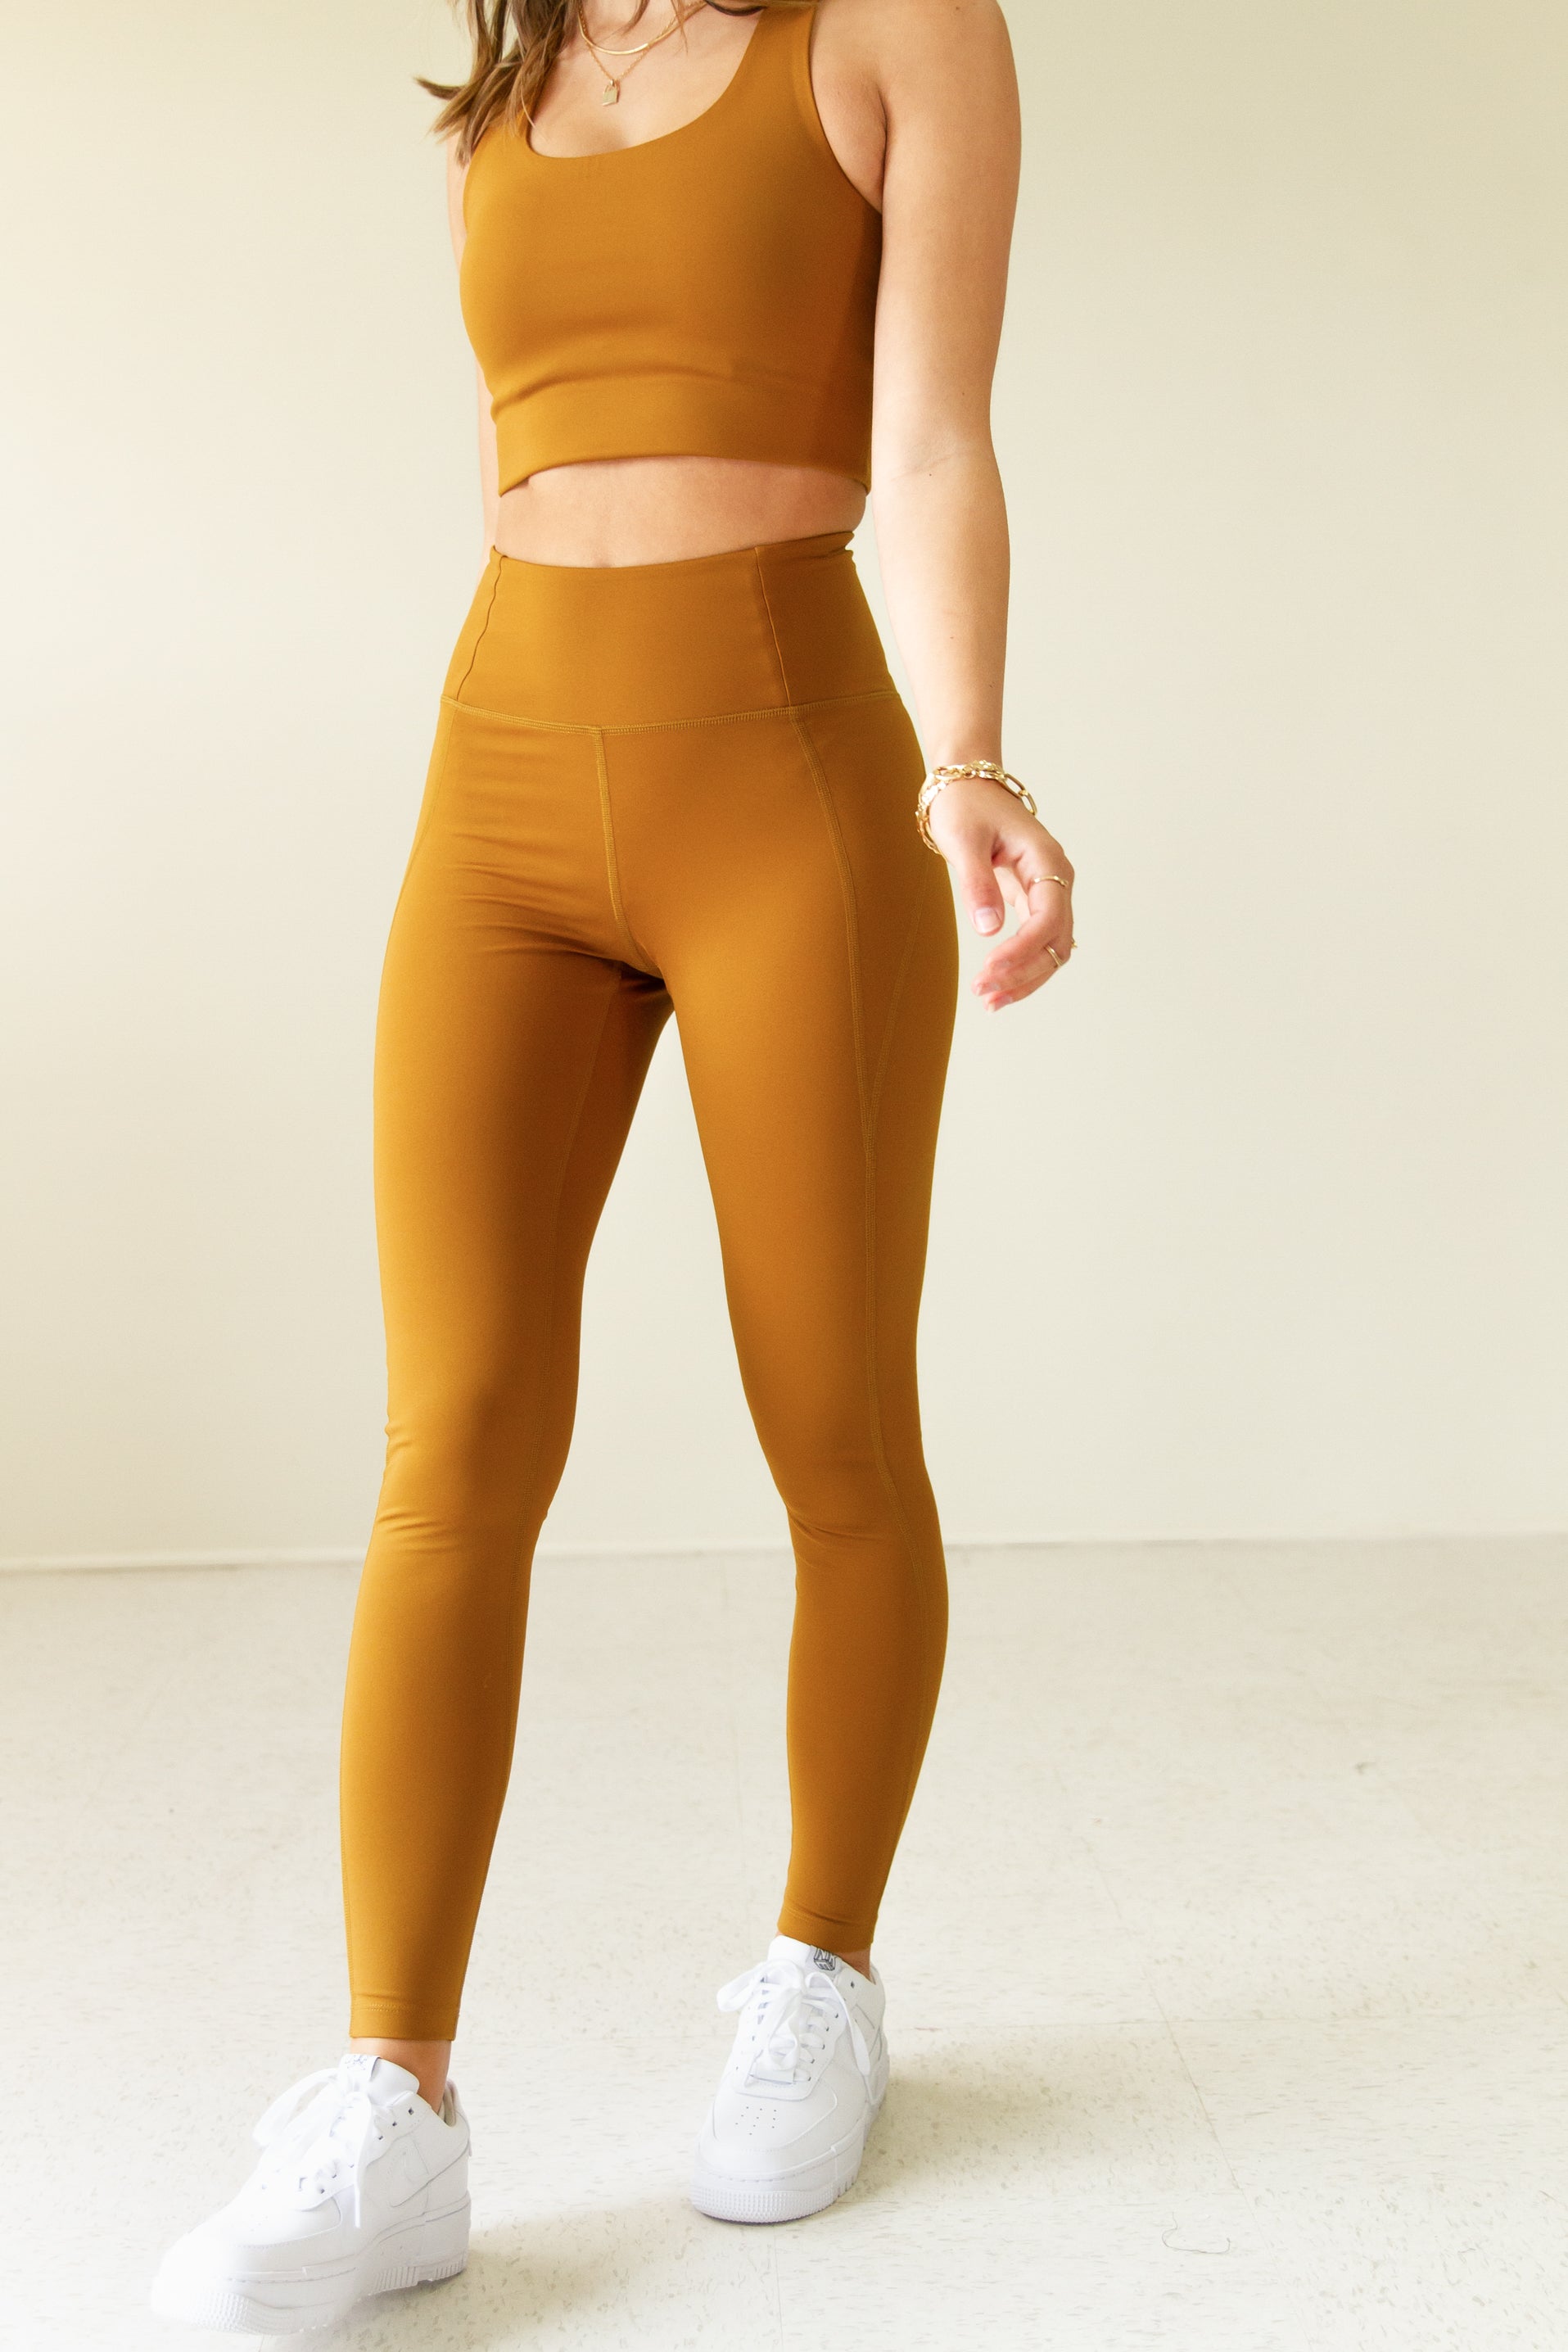 Girlfriend Collective Compressive High-Rise Leggings – Yogamatters